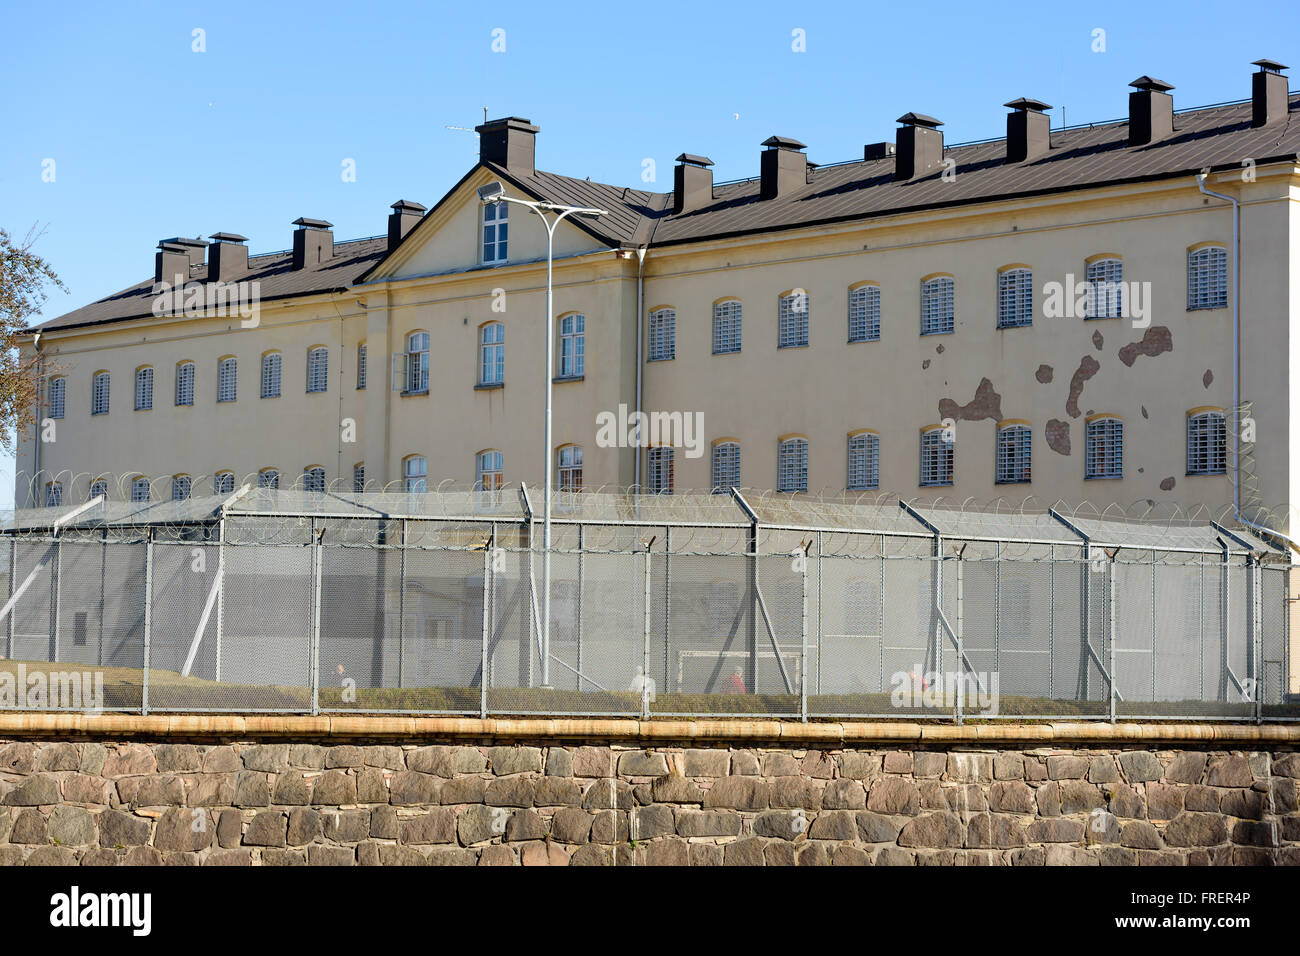 Kalmar, Sweden - March 17, 2016: The prison building with the exercise yard and surrounding barbed and netted fence. People walk Stock Photo